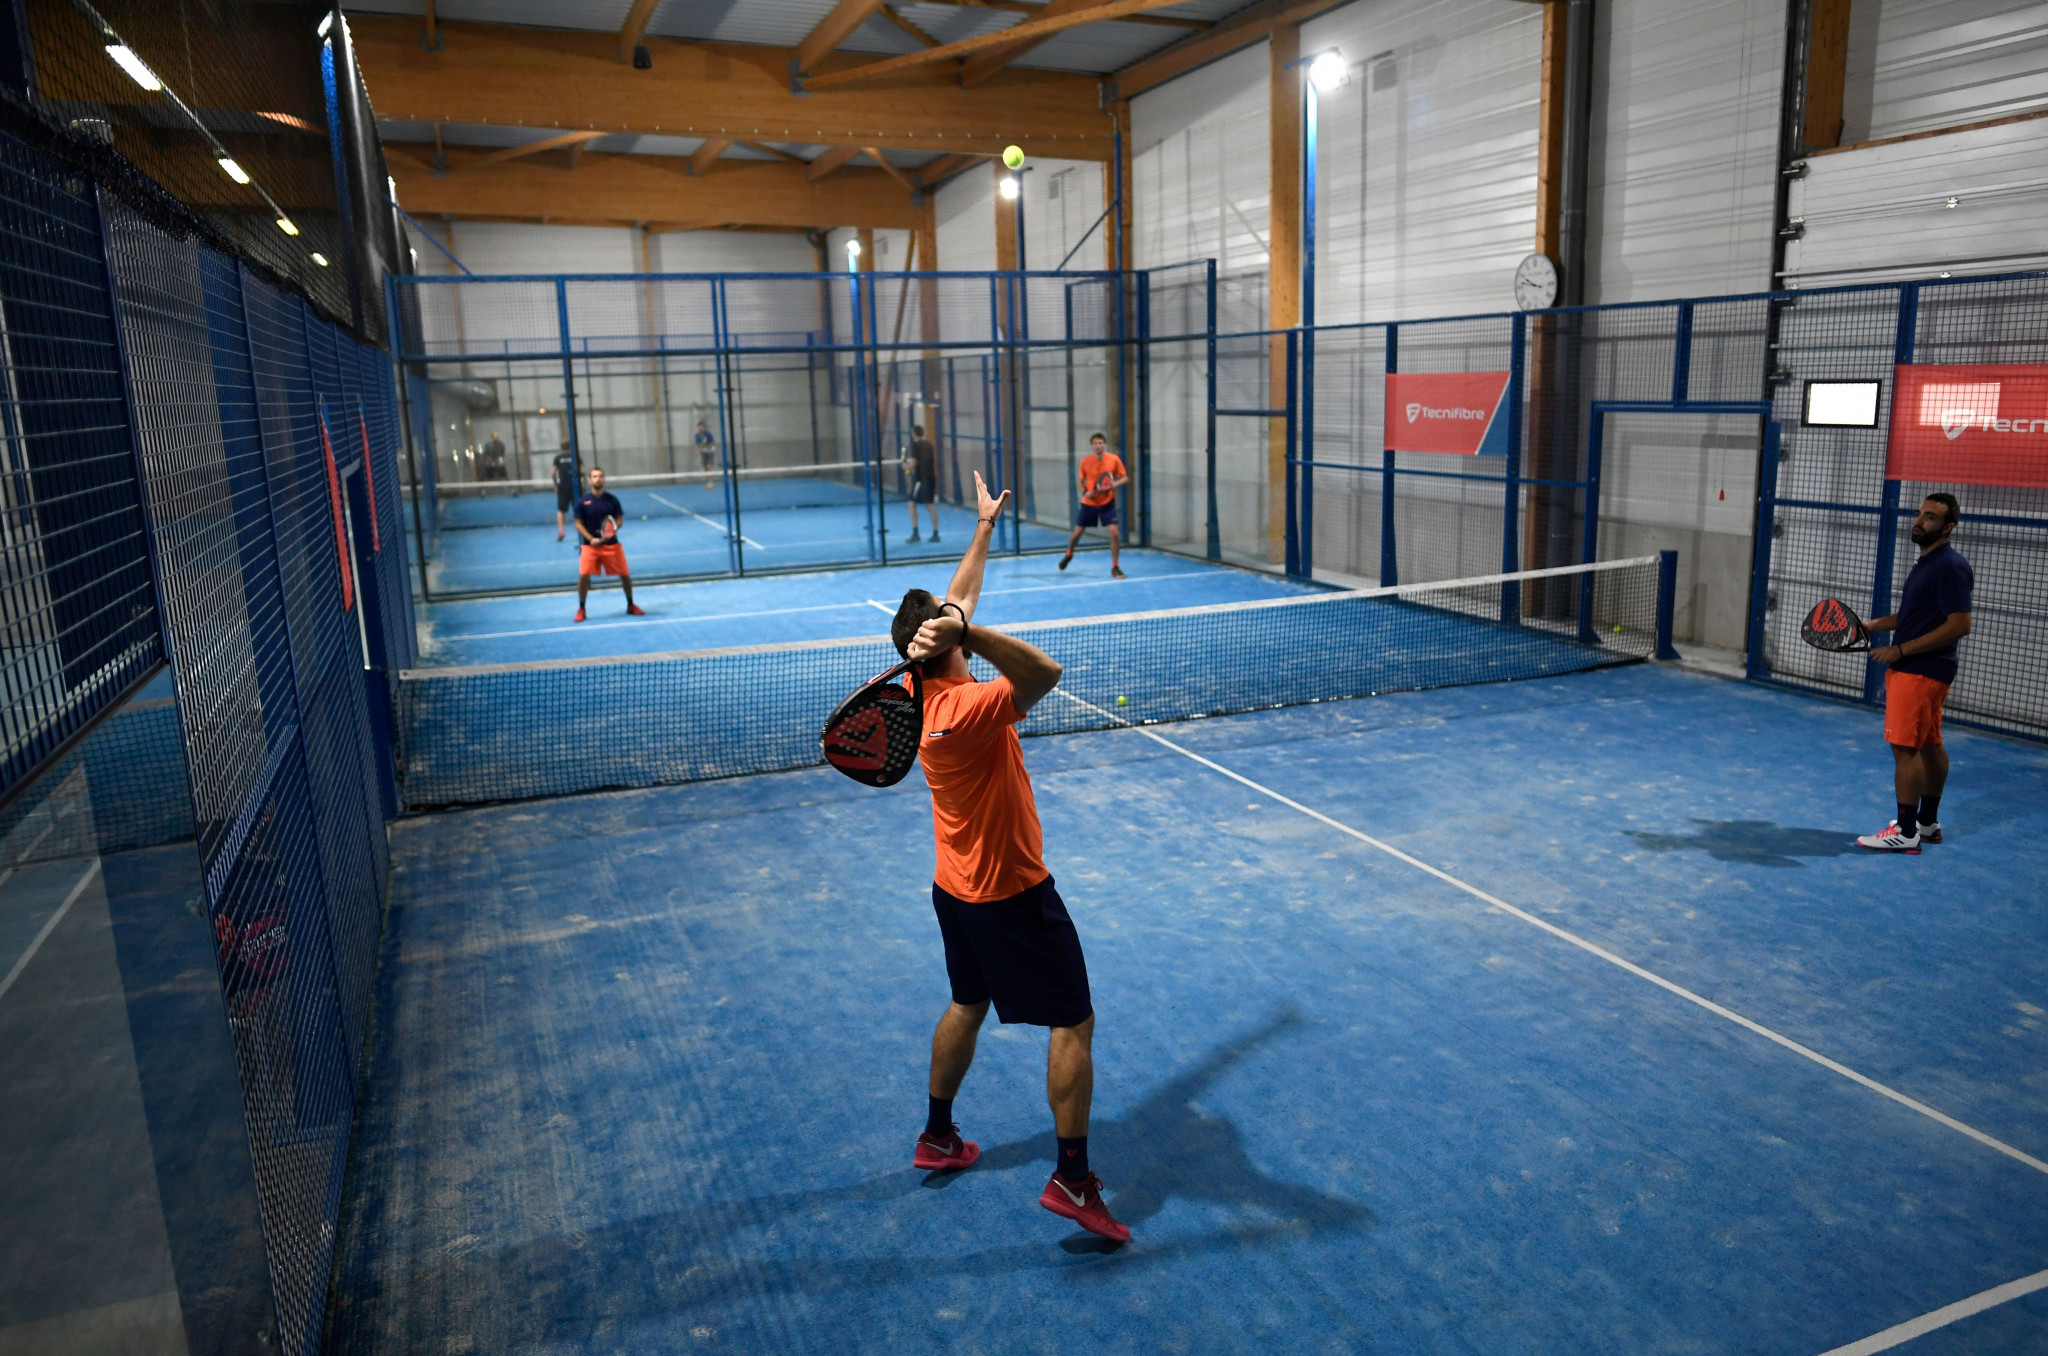 Padel is seen as one of the fastest growing sports in Europe ©Getty Images